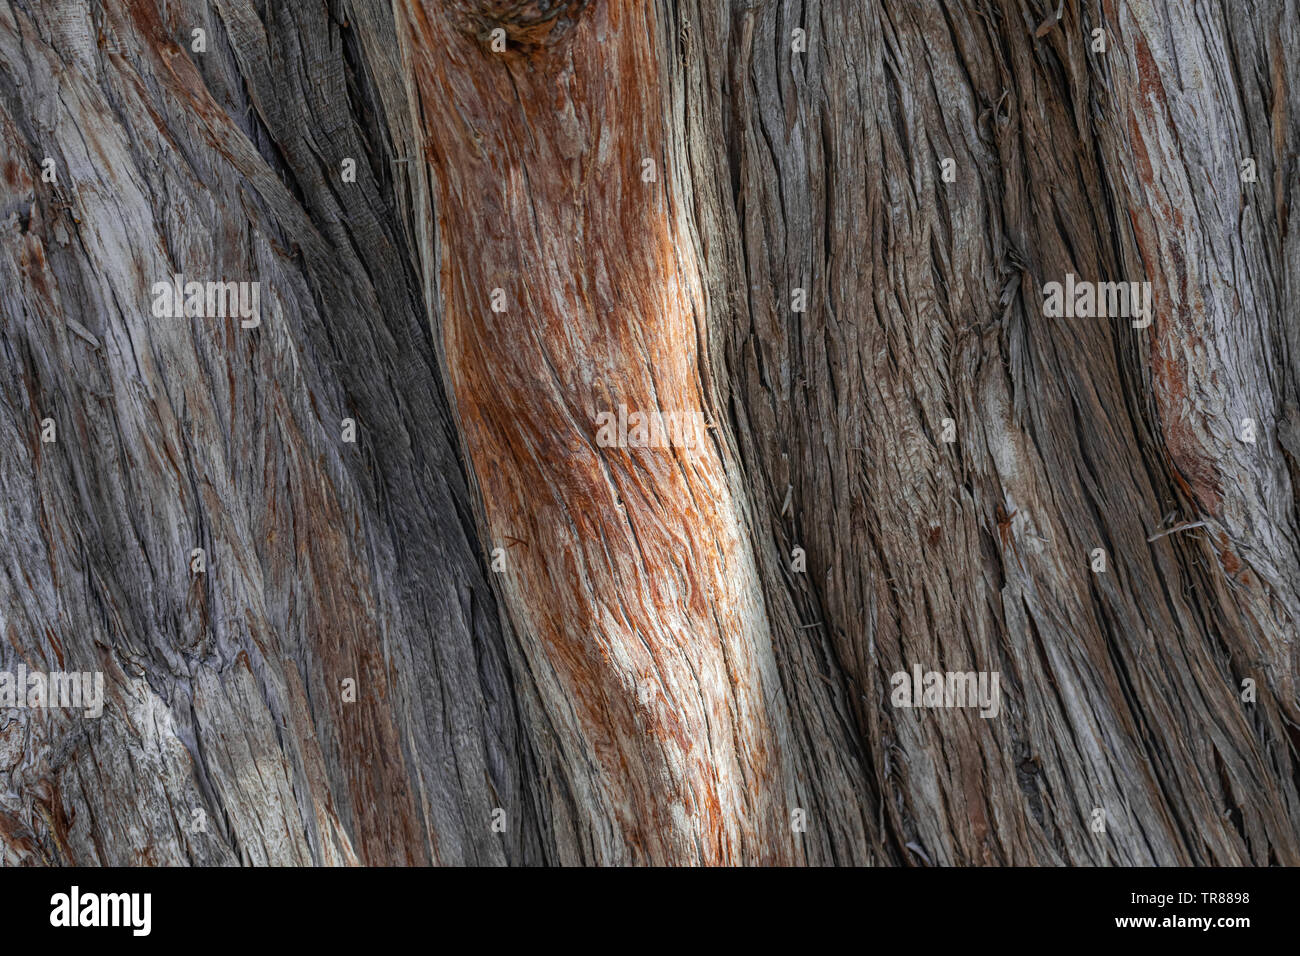 Mexican cypress (Cupressus benthamii), tree trunk texture, close view Stock Photo